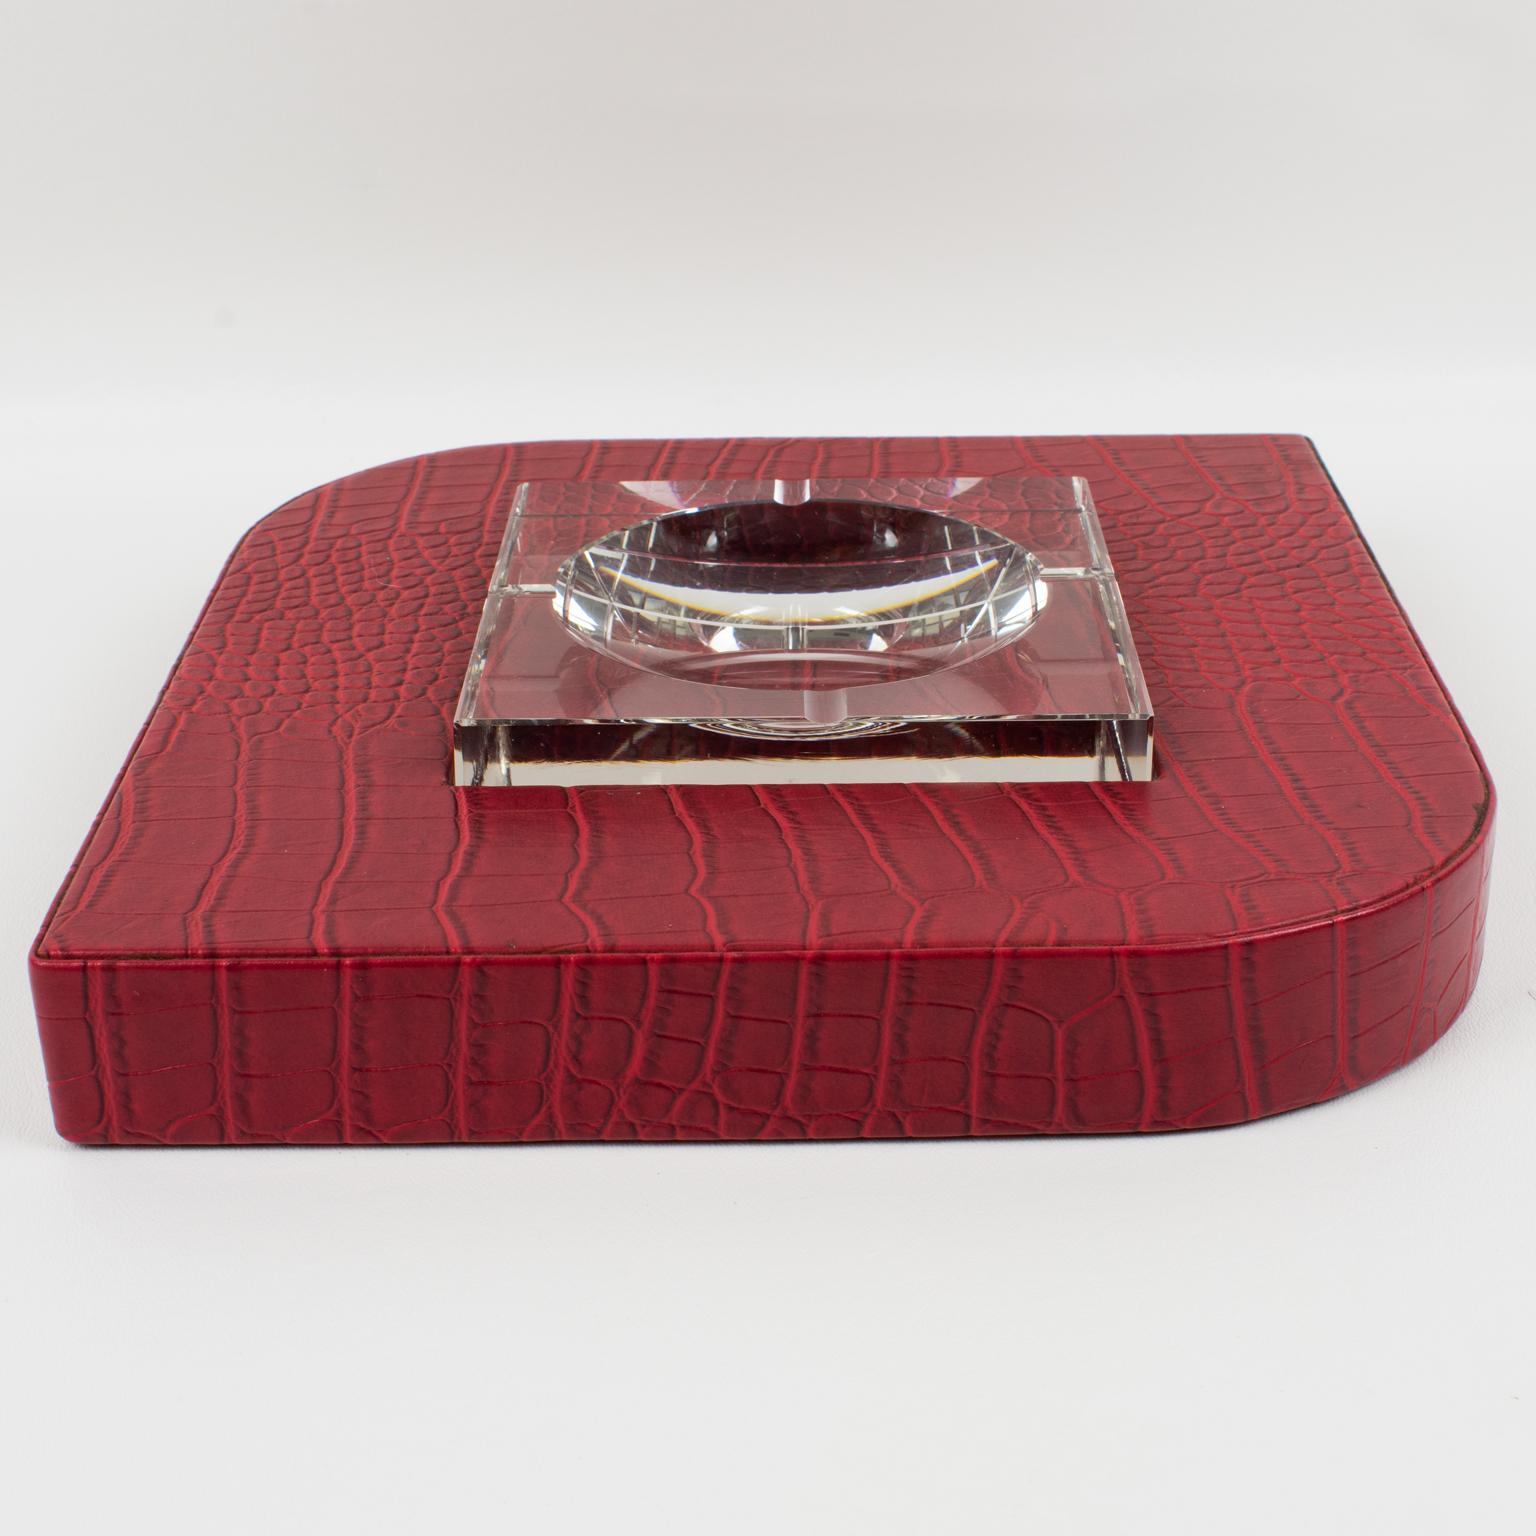 Dupre Lafon Style Red Leather and Crystal Cigar Ashtray Catchall Vide Poche In Excellent Condition For Sale In Atlanta, GA